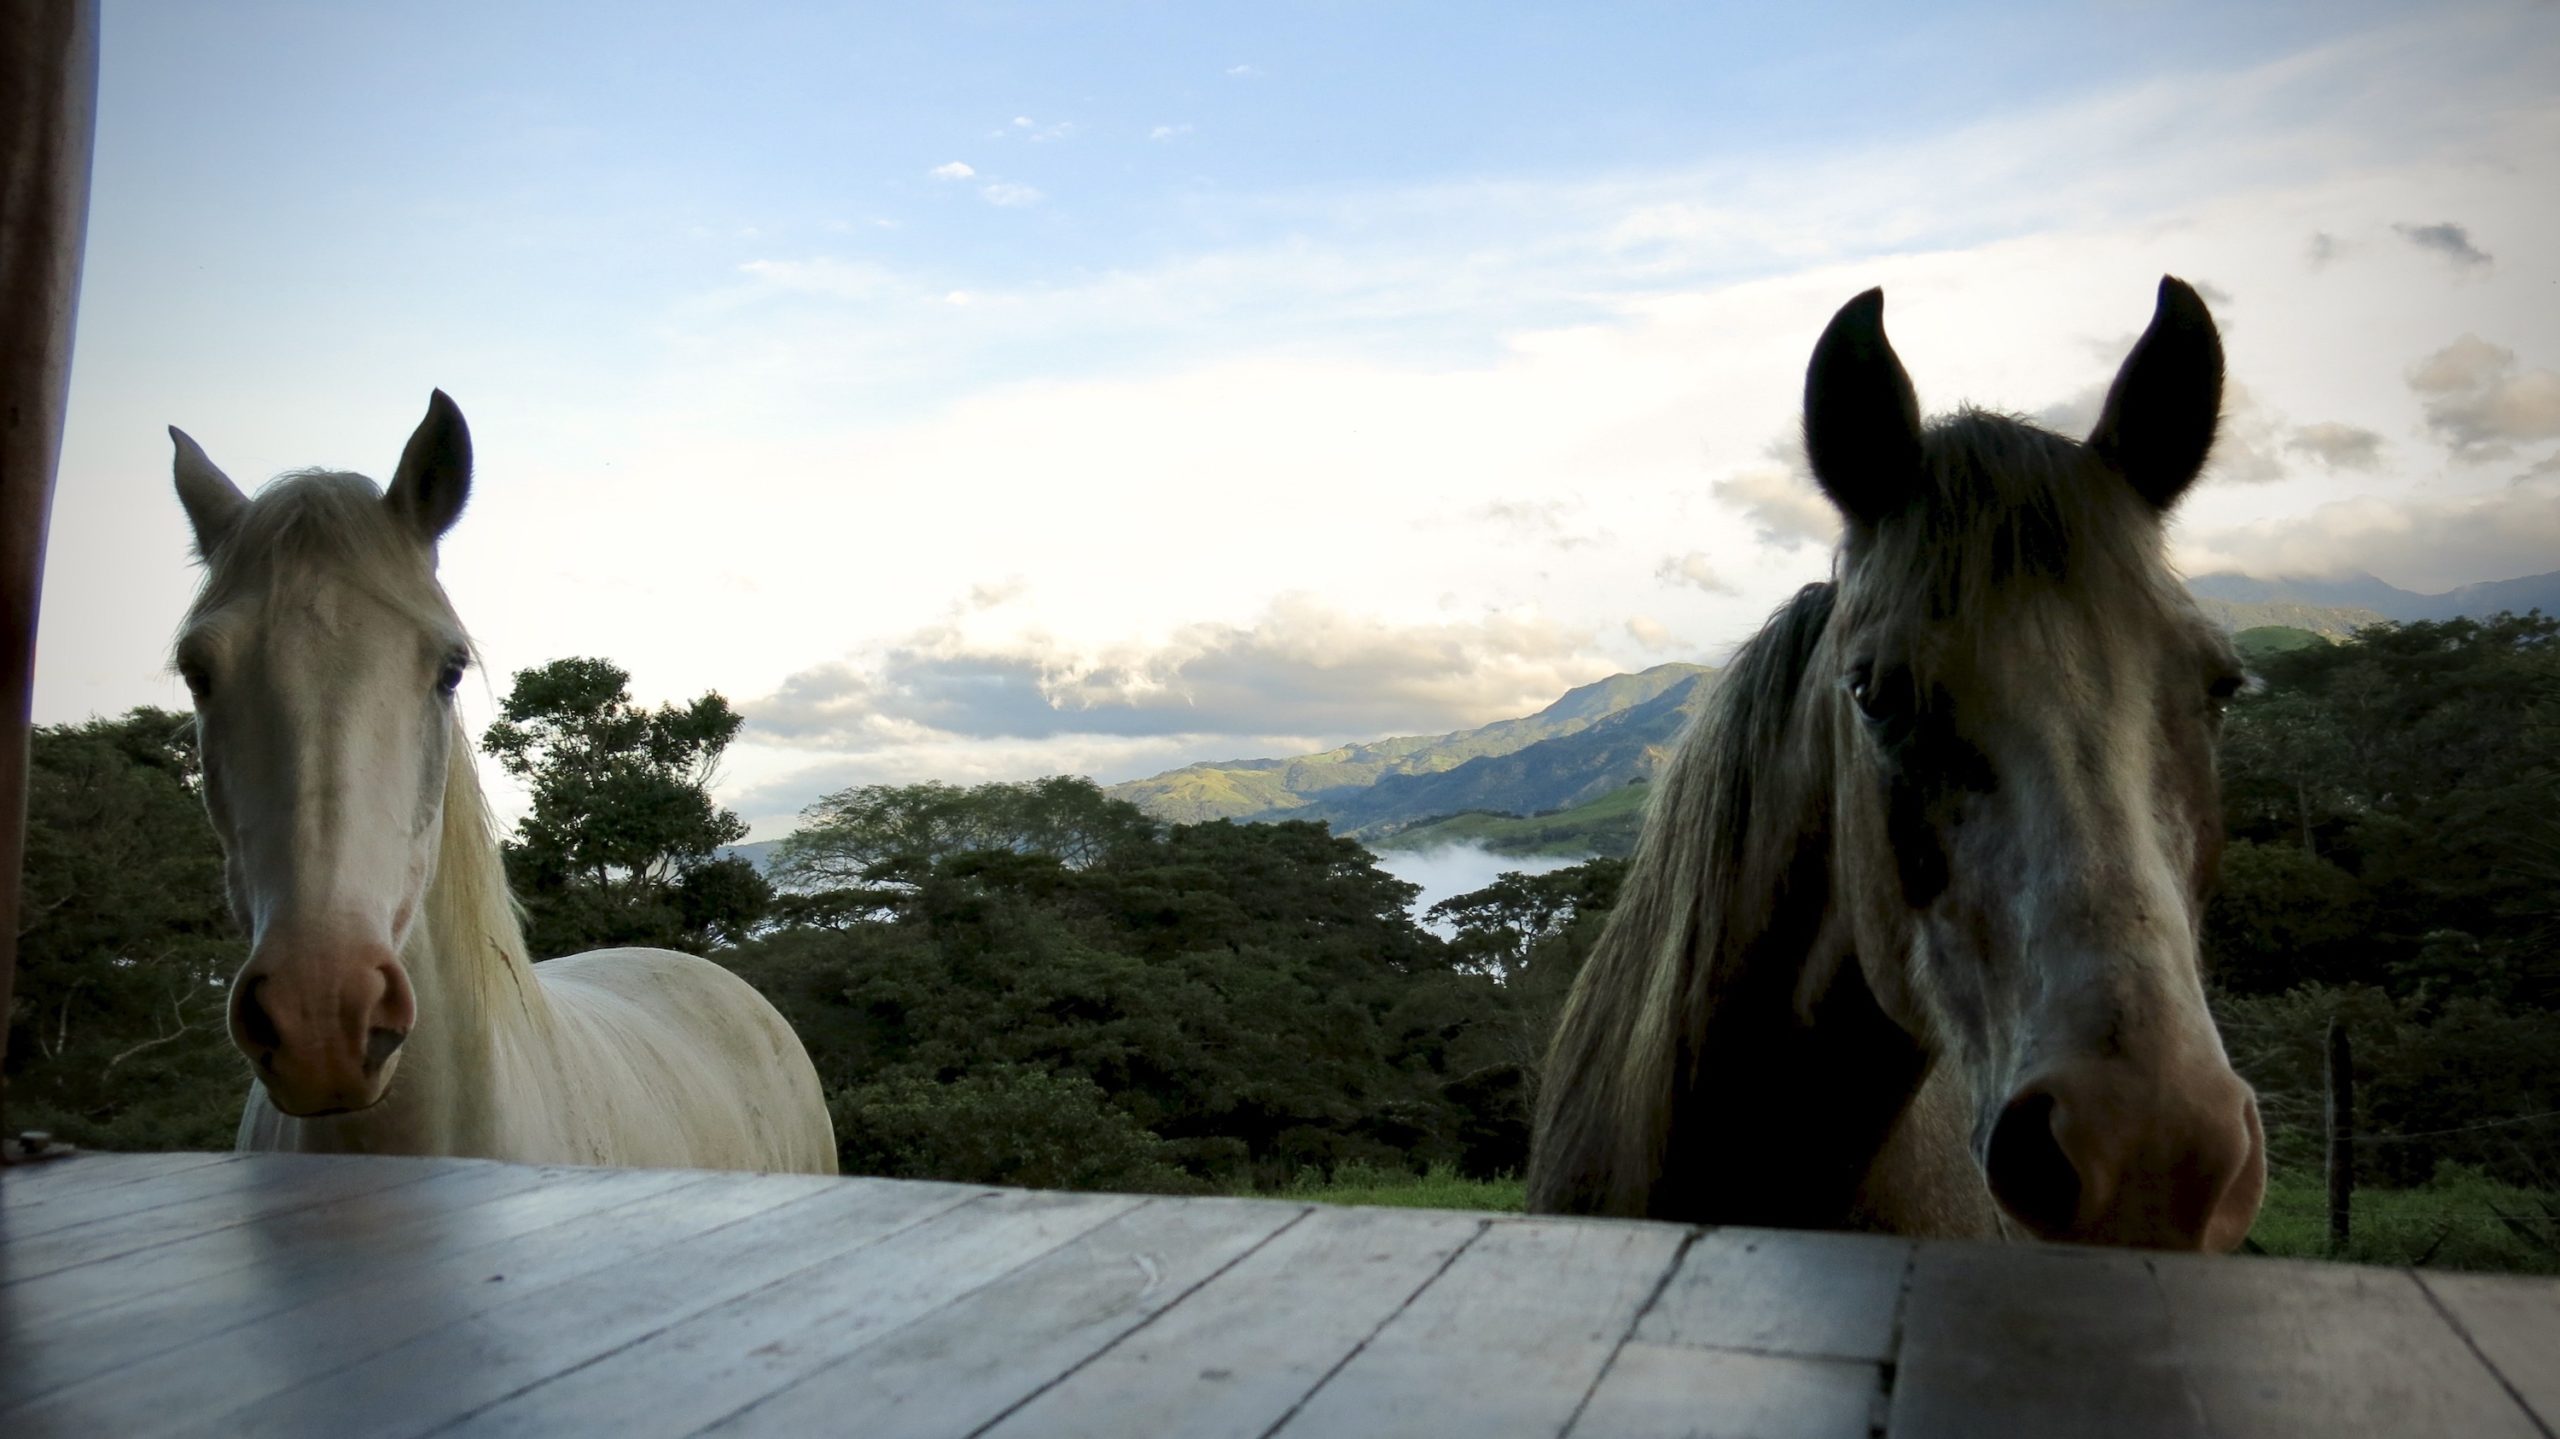 Animal Communication Communicator and Holistic Healing Tiago and Beso de Caramelo Horses with hills of costa rica in background